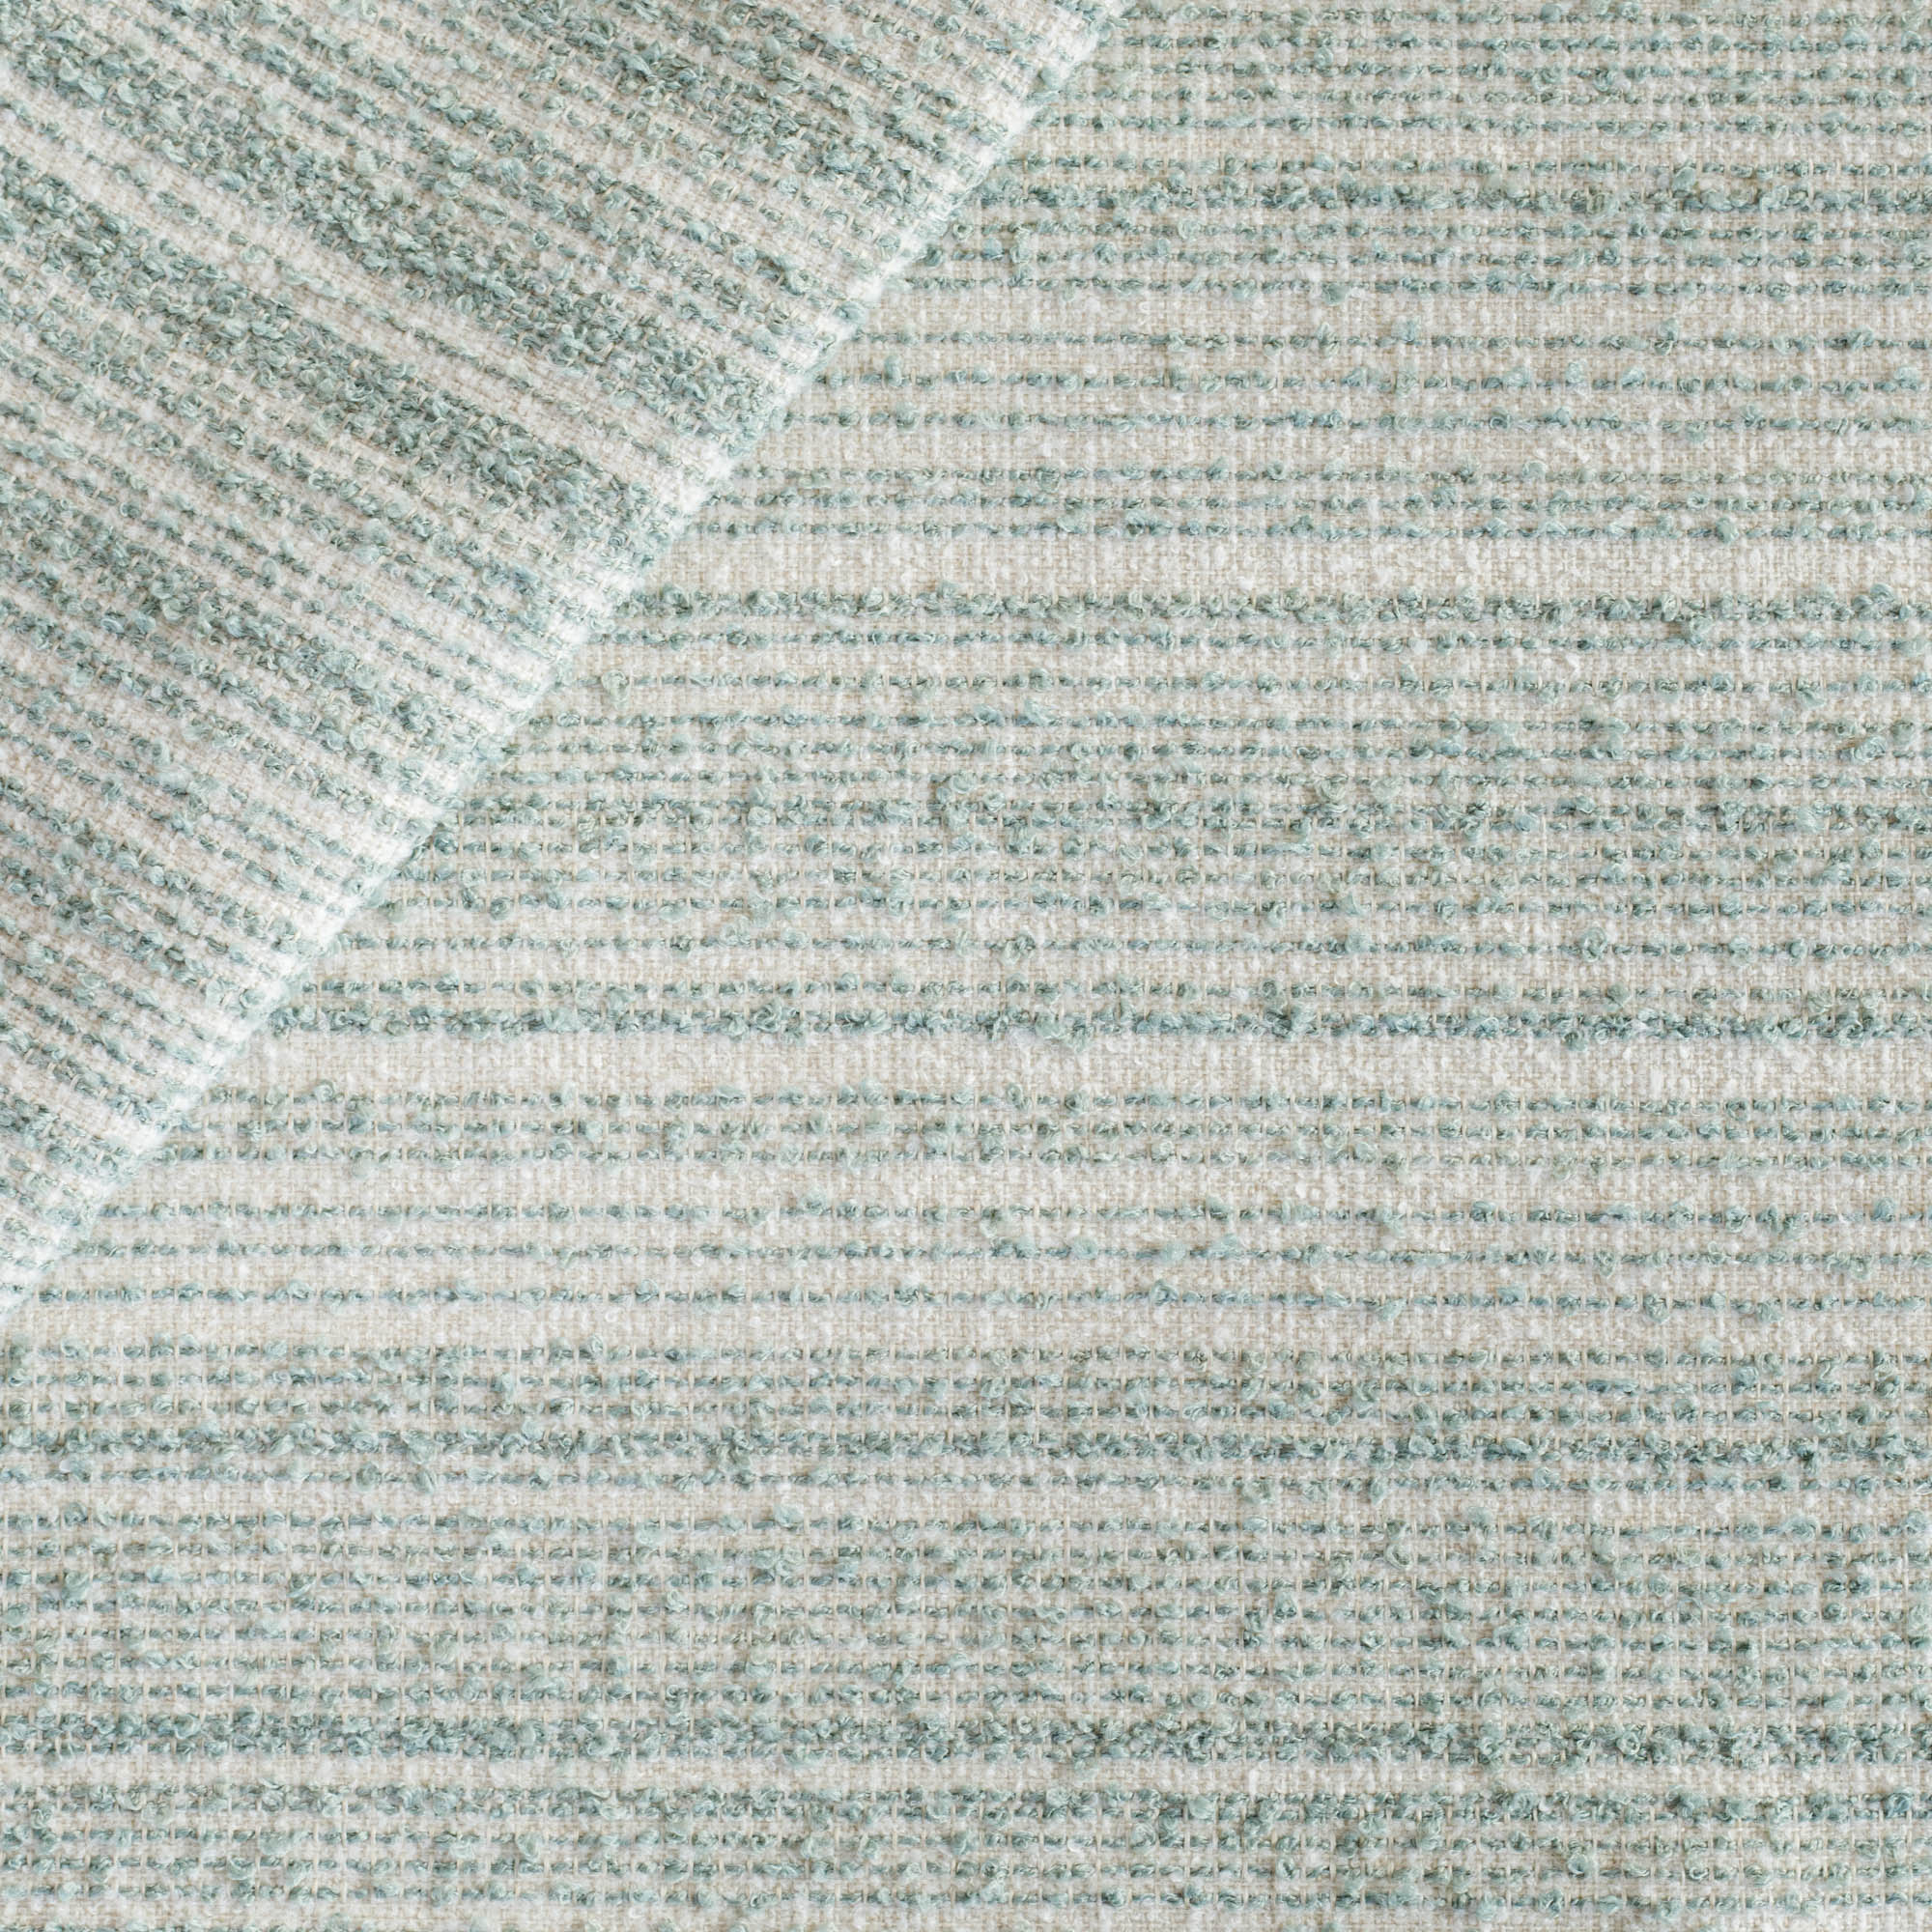 Kos Stripe Jade Fabric, a loopy boucle blue green and cream stripe upholstery fabric from Tonic Living